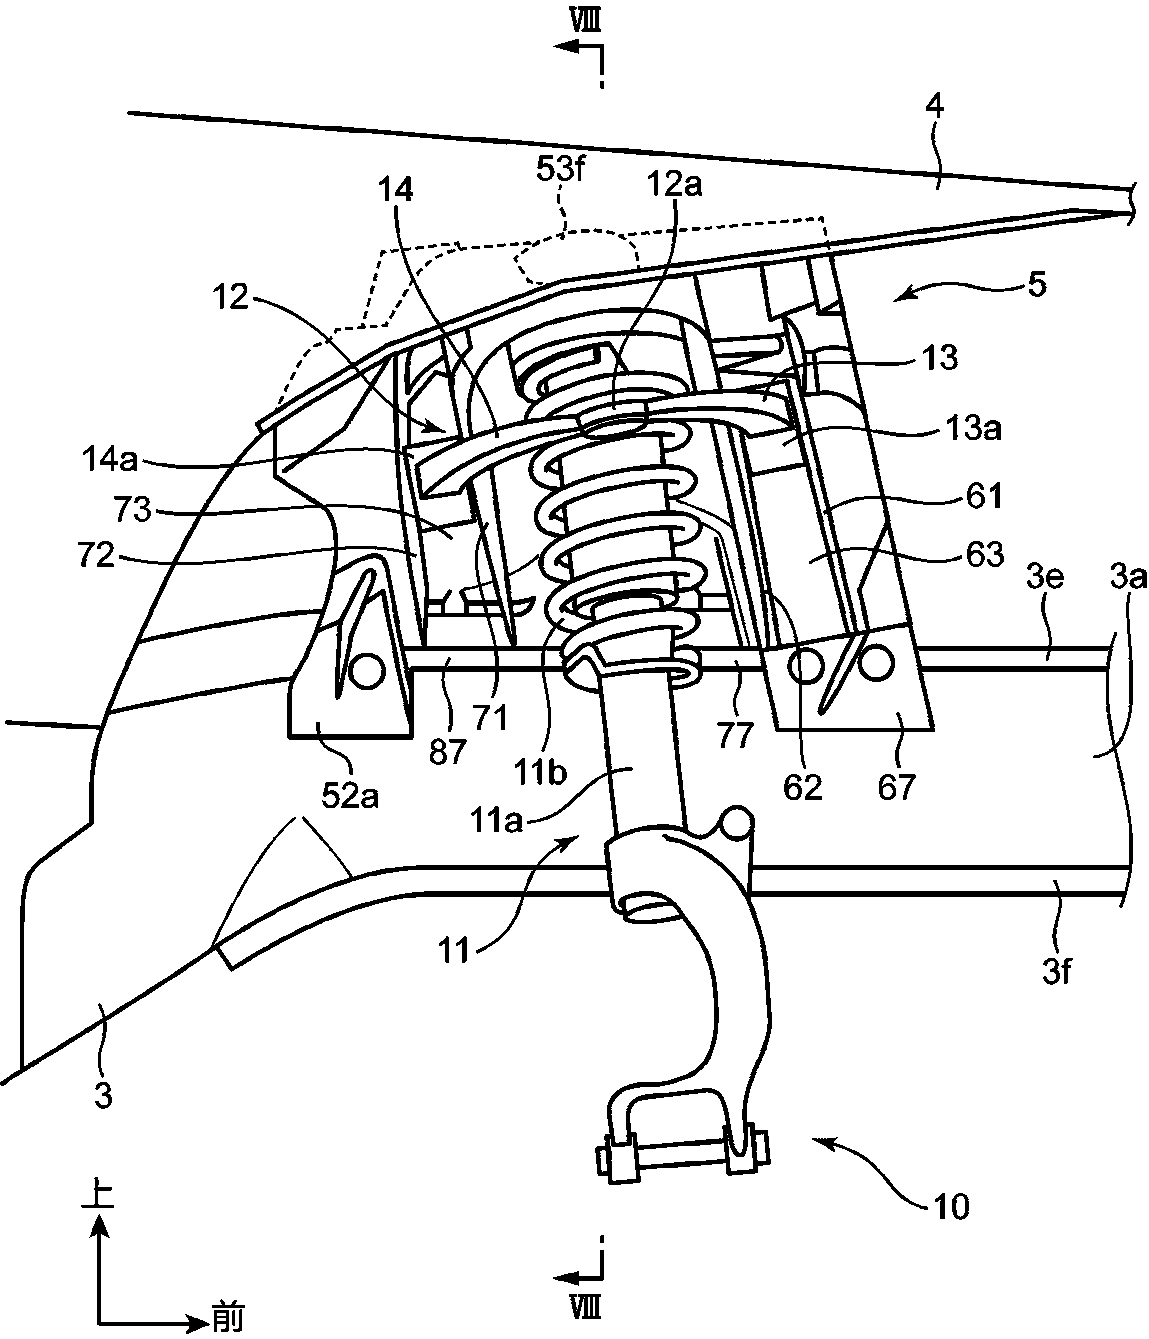 Front vehicle body structure for vehicle